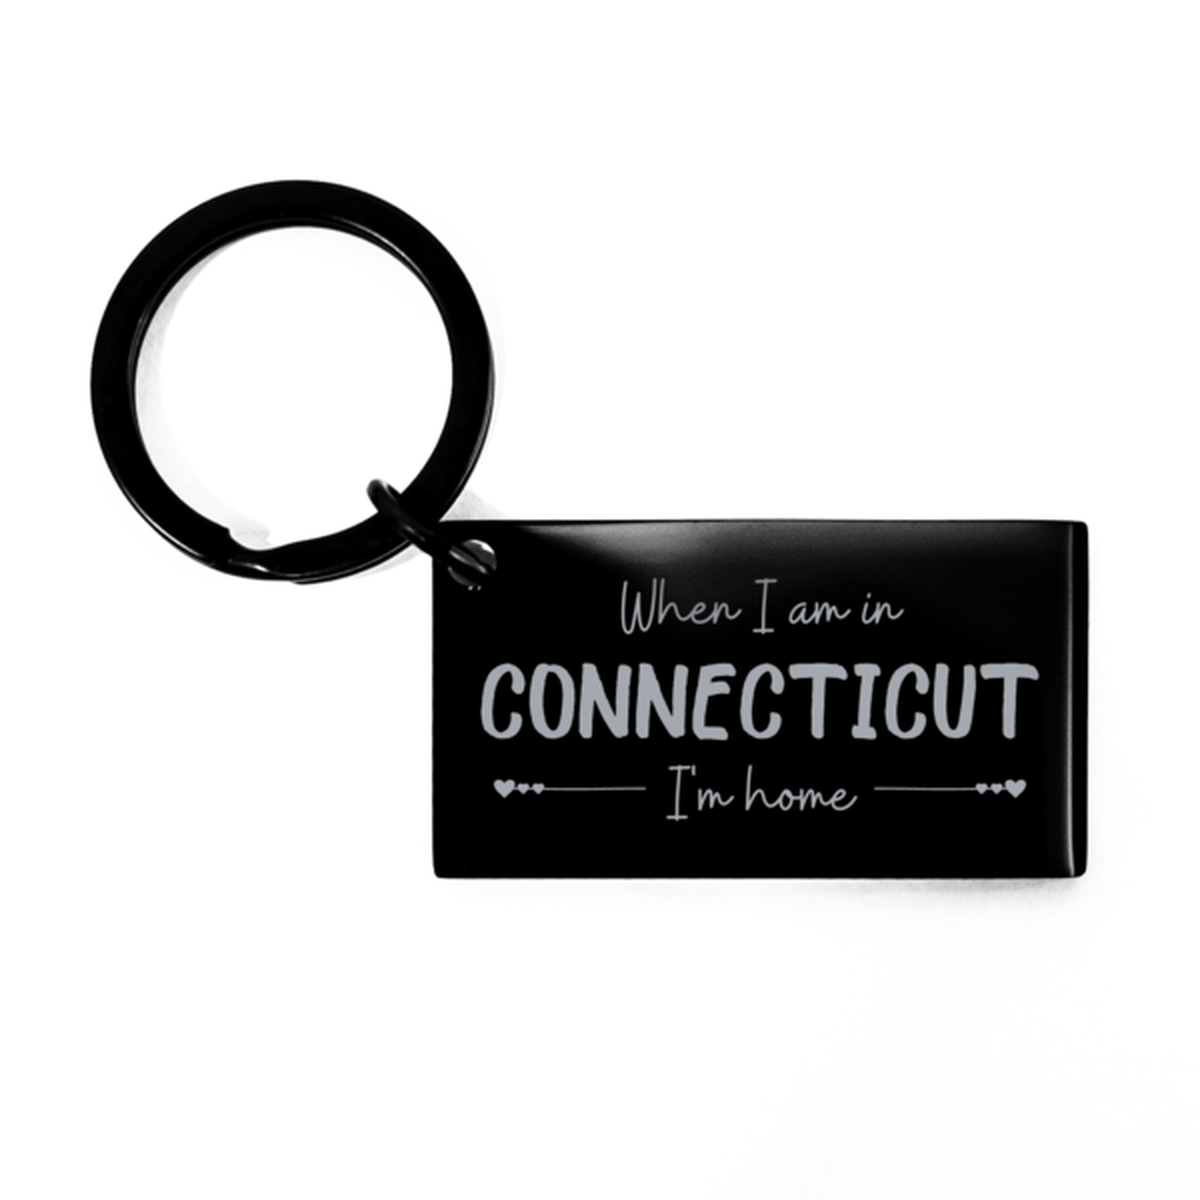 When I am in Connecticut I'm home Keychain, Cheap Gifts For Connecticut, State Connecticut Birthday Gifts for Friends Coworker